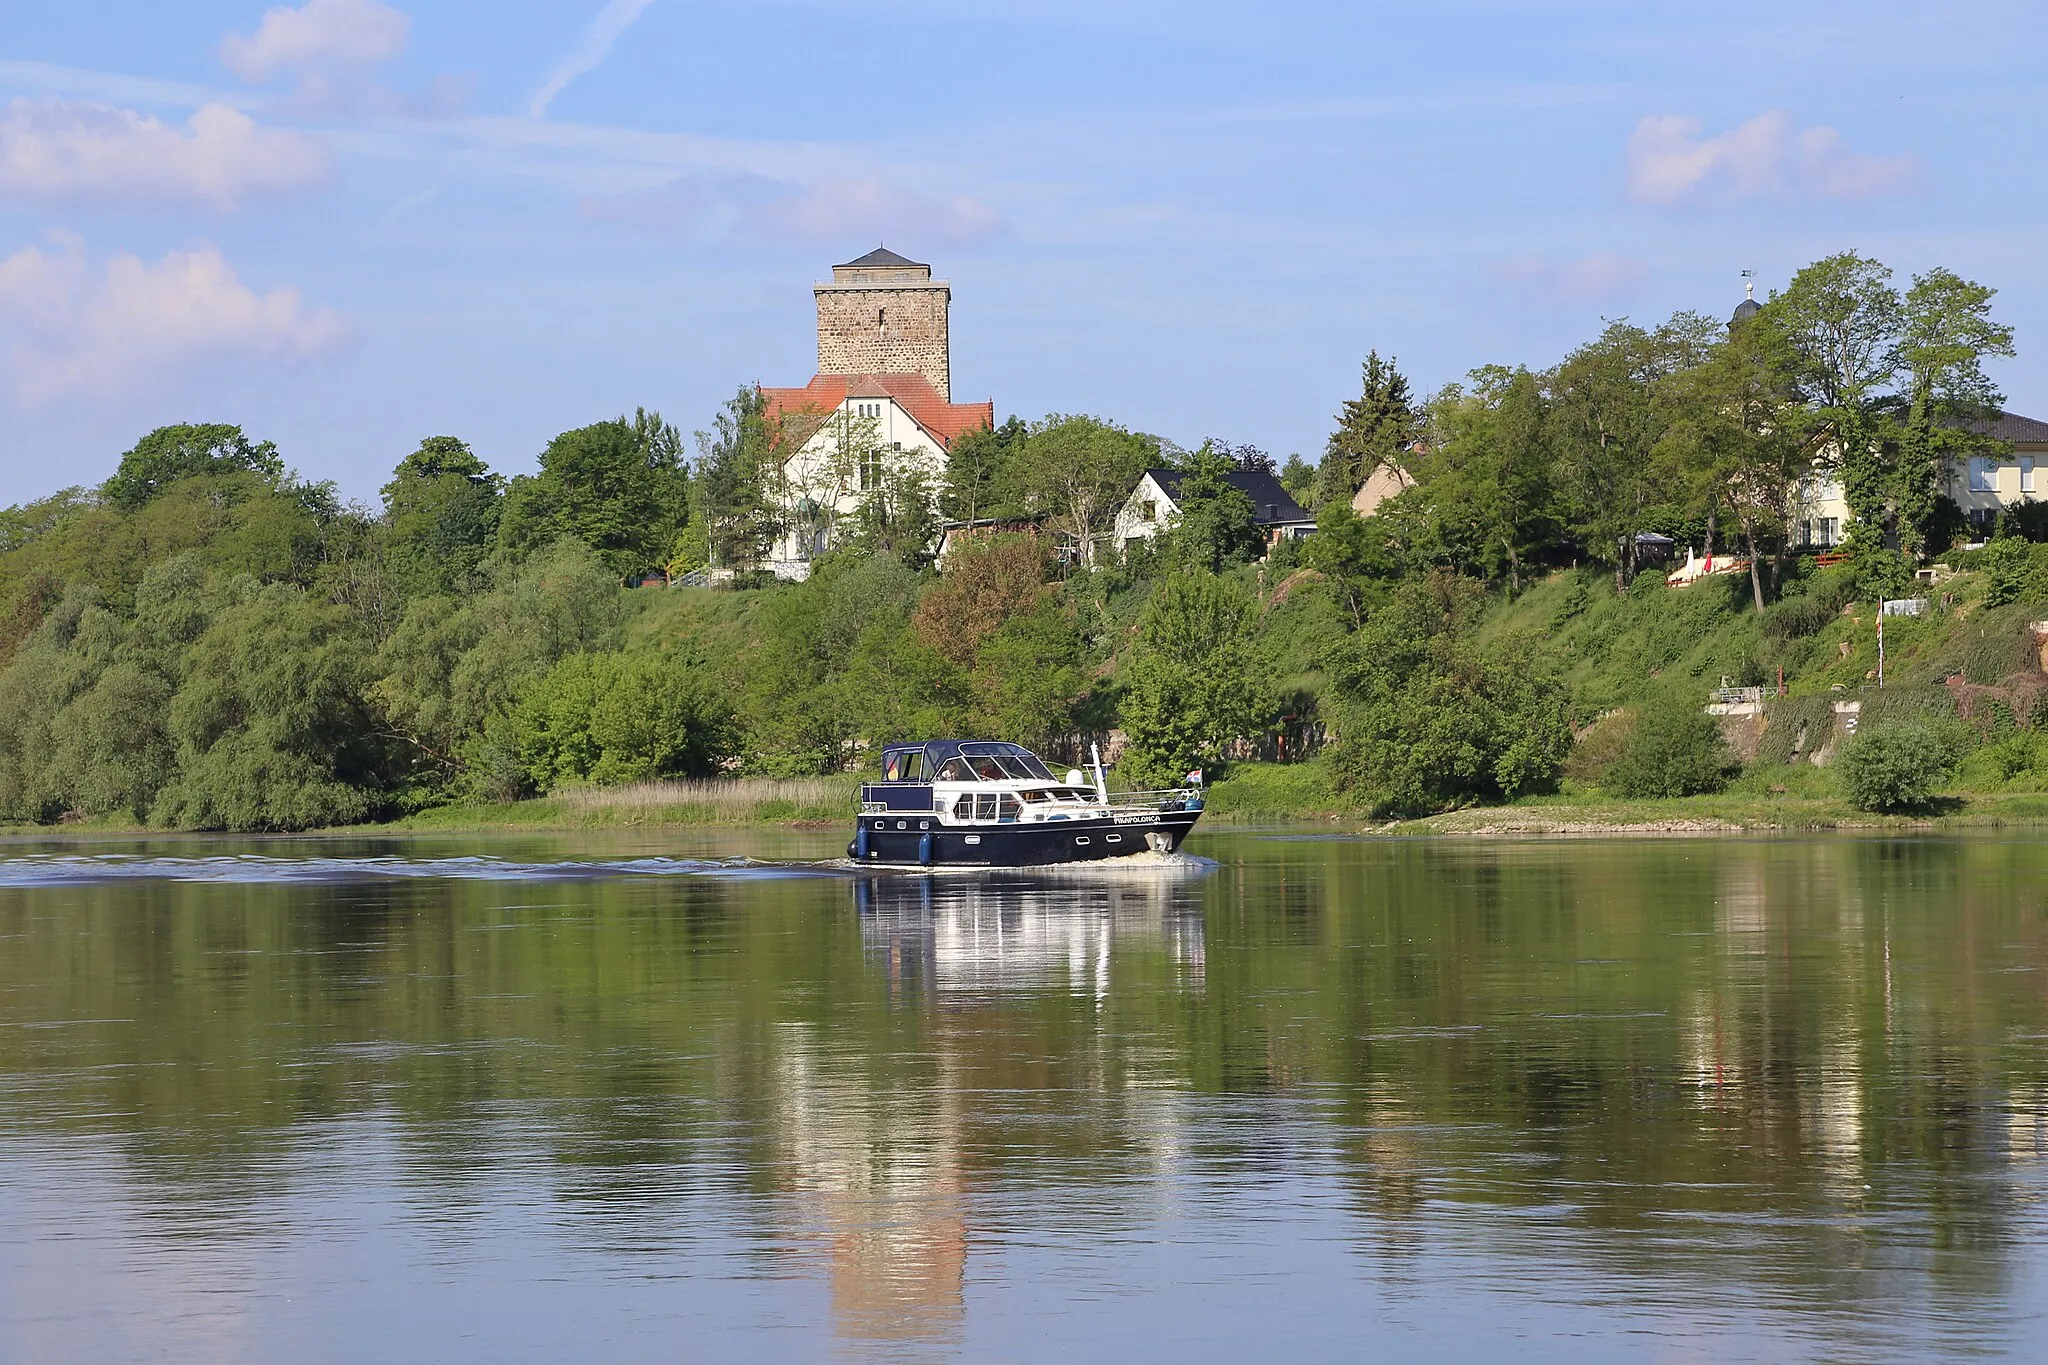 Photo showing: Klutturm - a remnant of the Rogätz castle. Rogätz is a town on the western bank of the river Elbe (county of Börde in Saxony-Anhalt, Germany).